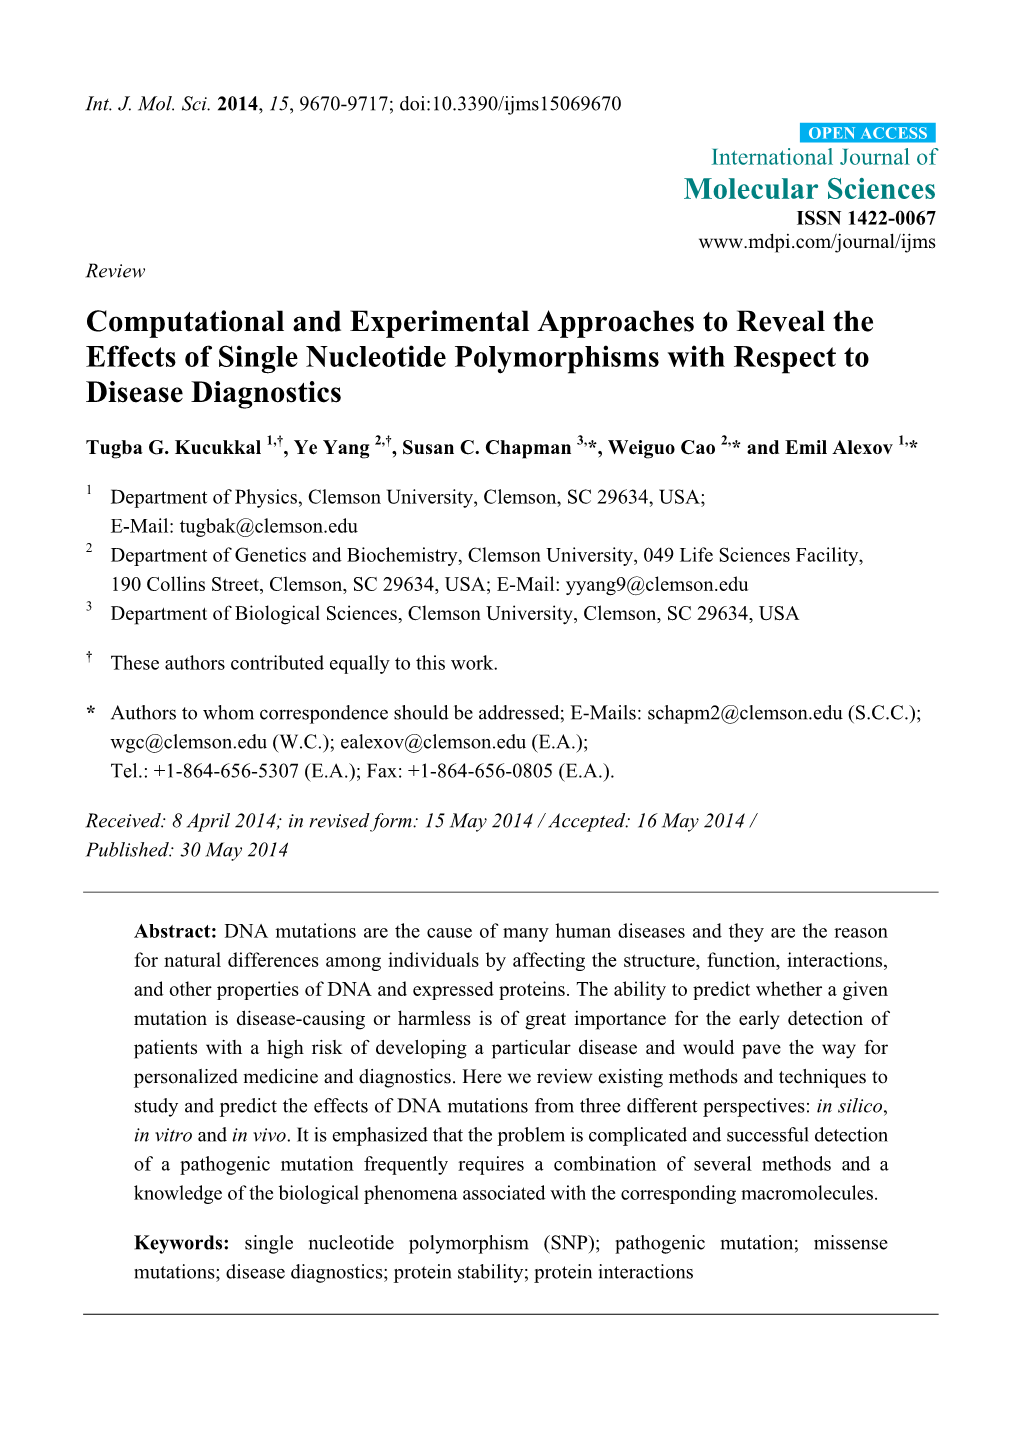 Computational and Experimental Approaches to Reveal the Effects of Single Nucleotide Polymorphisms with Respect to Disease Diagnostics